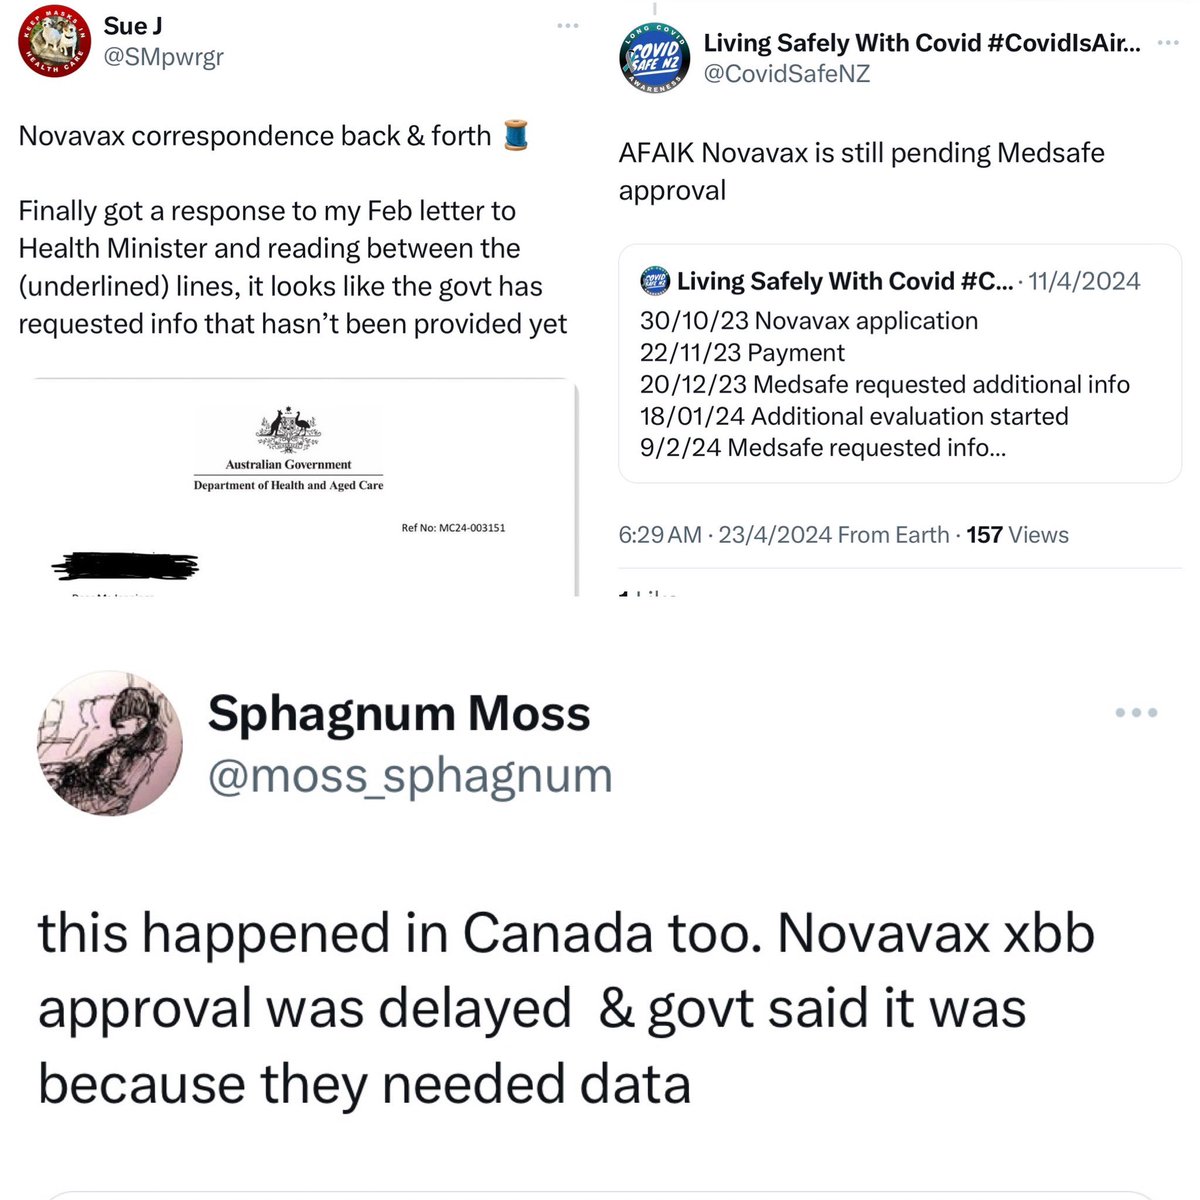 Exceptionally coincidental 🤔

In Aust, NZ AND Canada

approval of (& therefore access to) Novavax XBB delayed due to requests 4 extra info

Is @Novavax doing a poor job of providing necessary, timely info or is this a page out of delaying playbook?

@moss_sphagnum @CovidSafeNZ